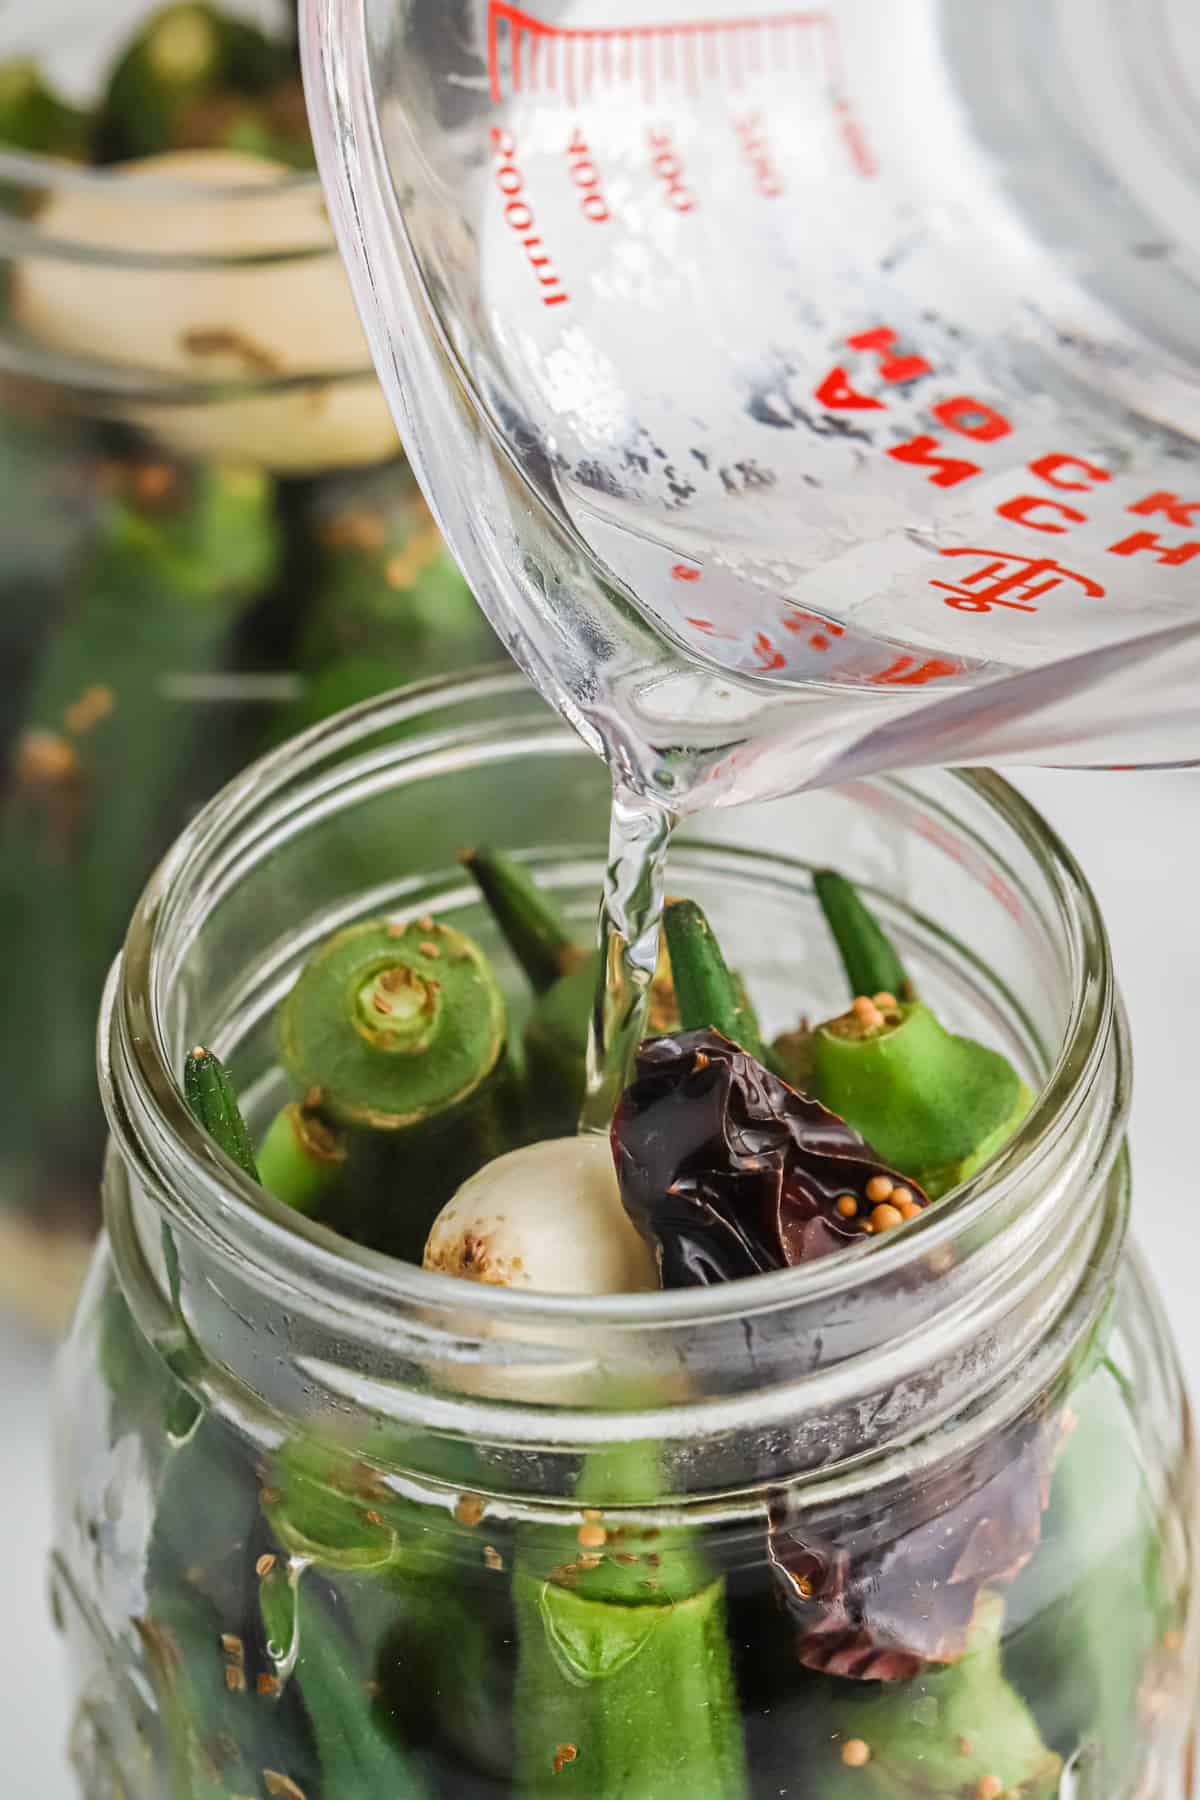 Water and vinegar mixture being poured into the jar of okra.